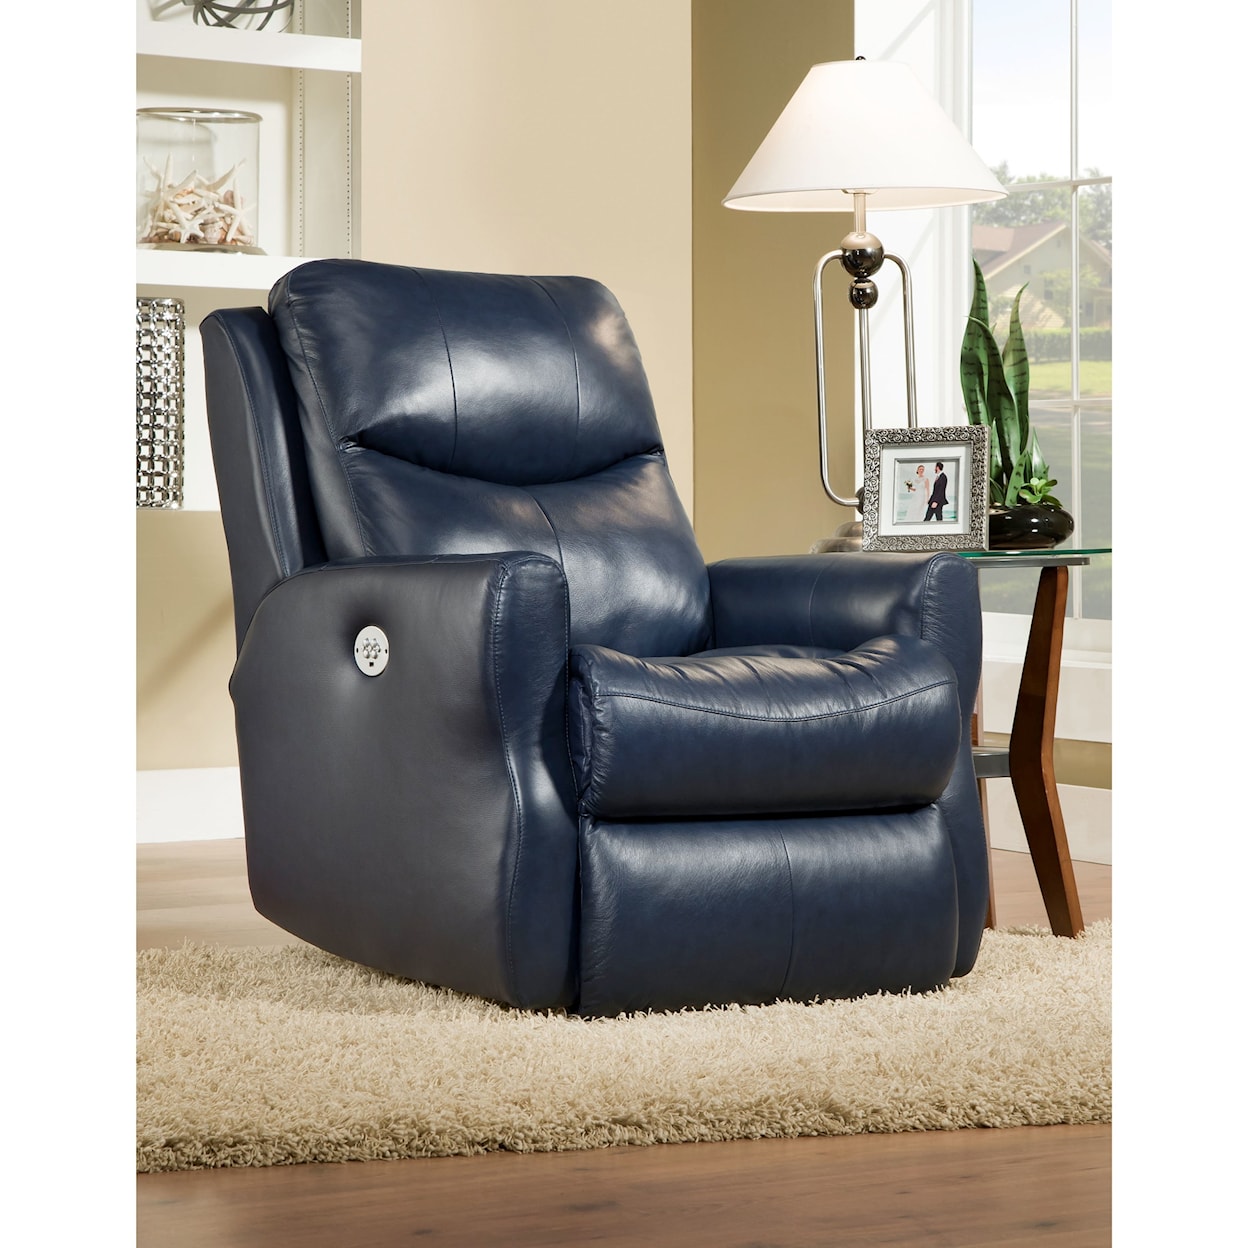 Southern Motion Fame Fame Layflat Lift Chair with Power Headrest